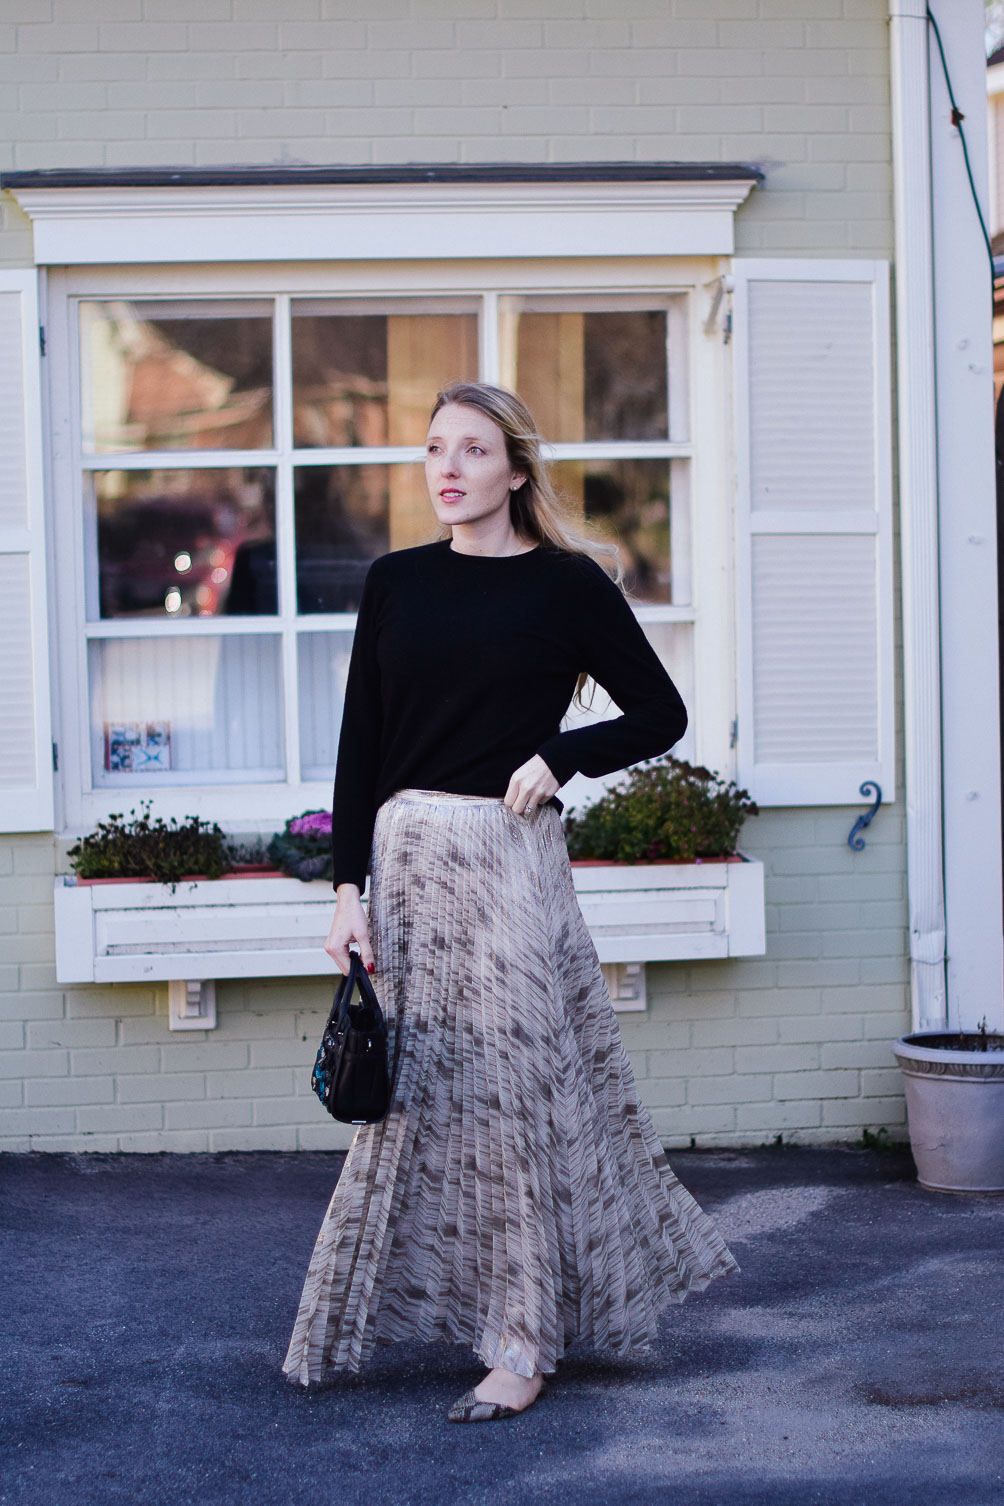 styling a metallic maxi skirt with snakeskin flats and cozy cashmere sweater